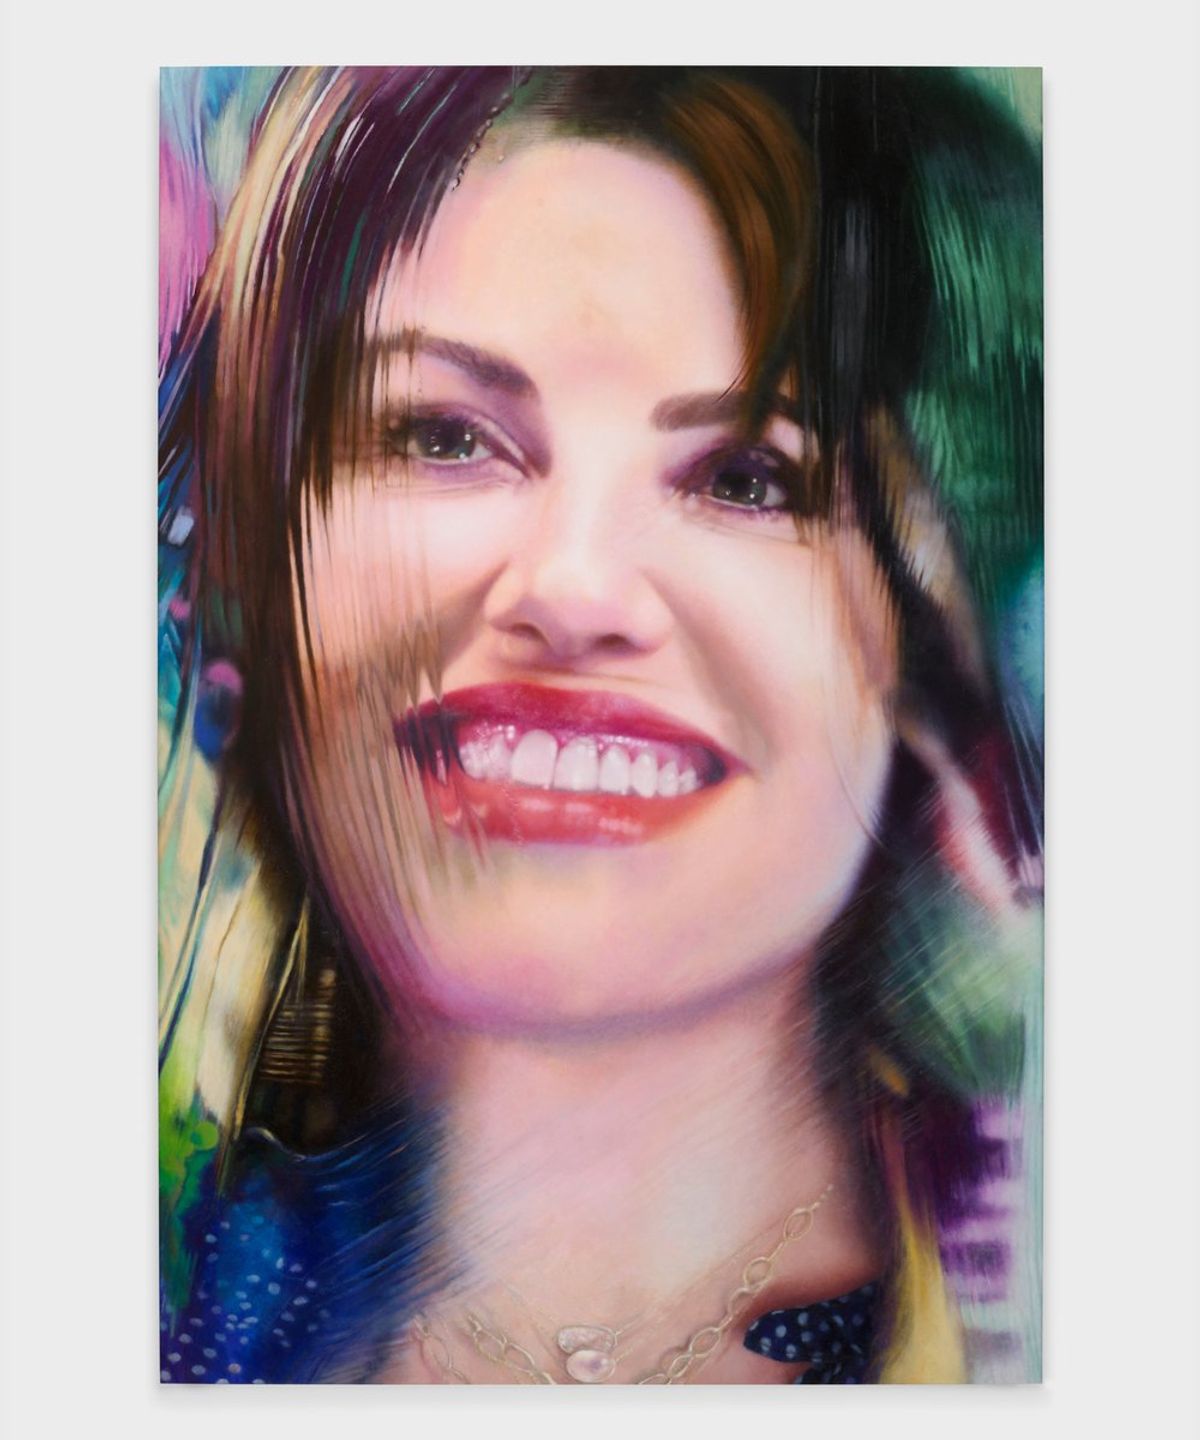 Monica Lewinsky by Marilyn Minter

© MARILYN MINTER/COURTESY THE ARTIST AND LGDR.